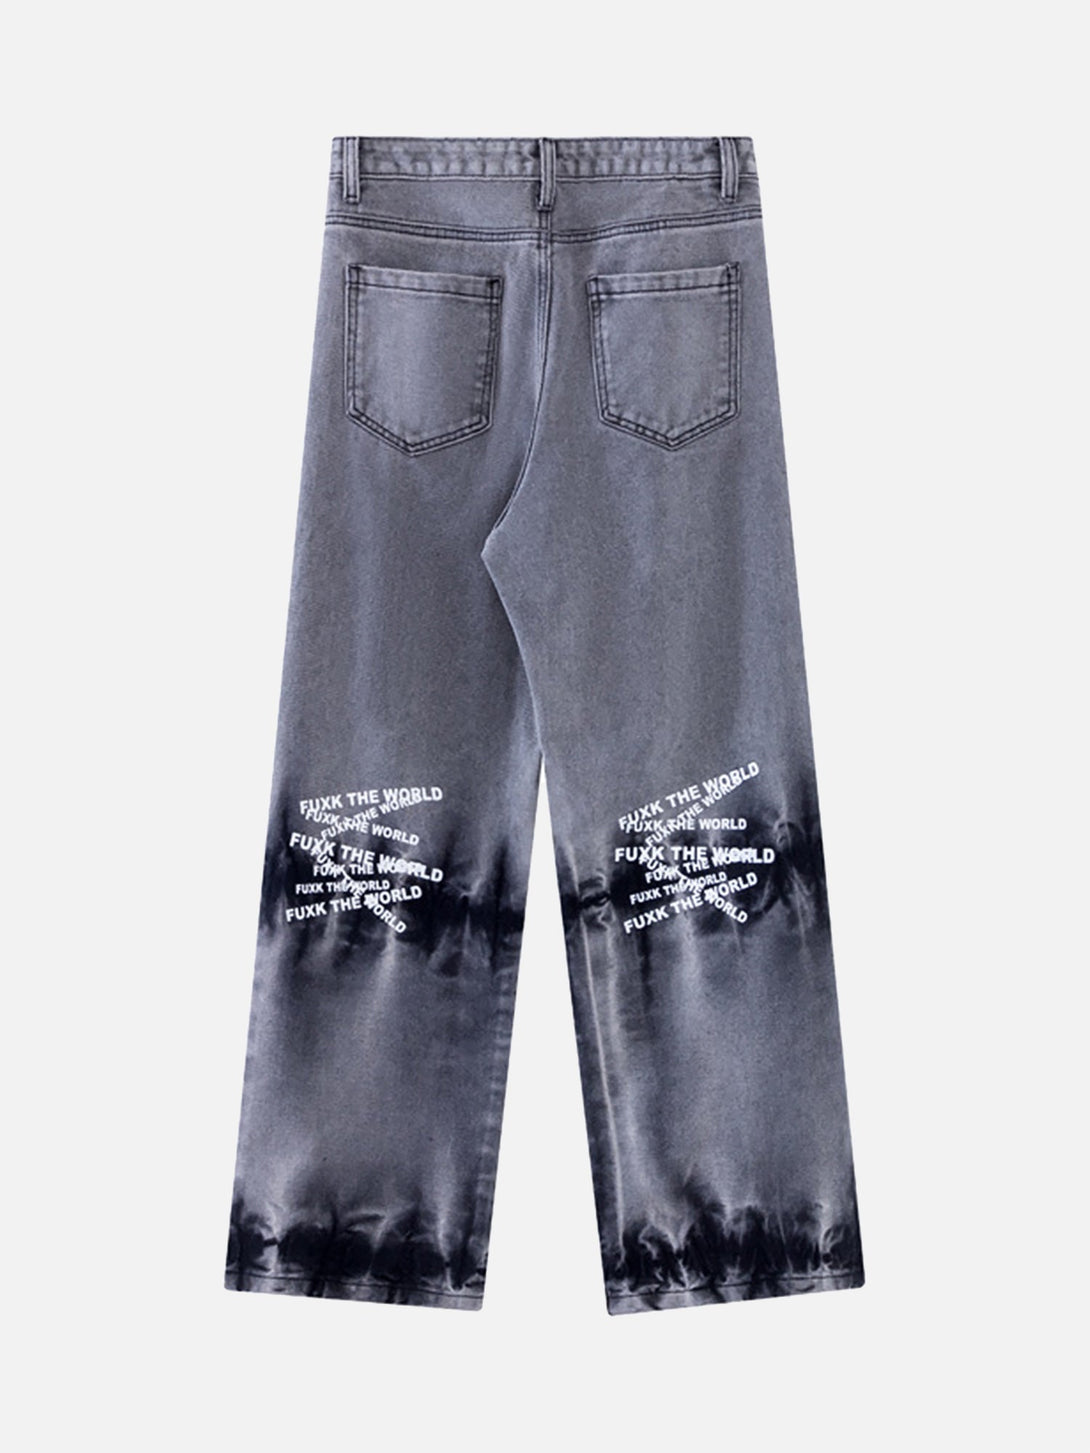 Majesda® - Niche Design Letter Embroidered Tie-dye Gradient Jeans- Outfit Ideas - Streetwear Fashion - majesda.com